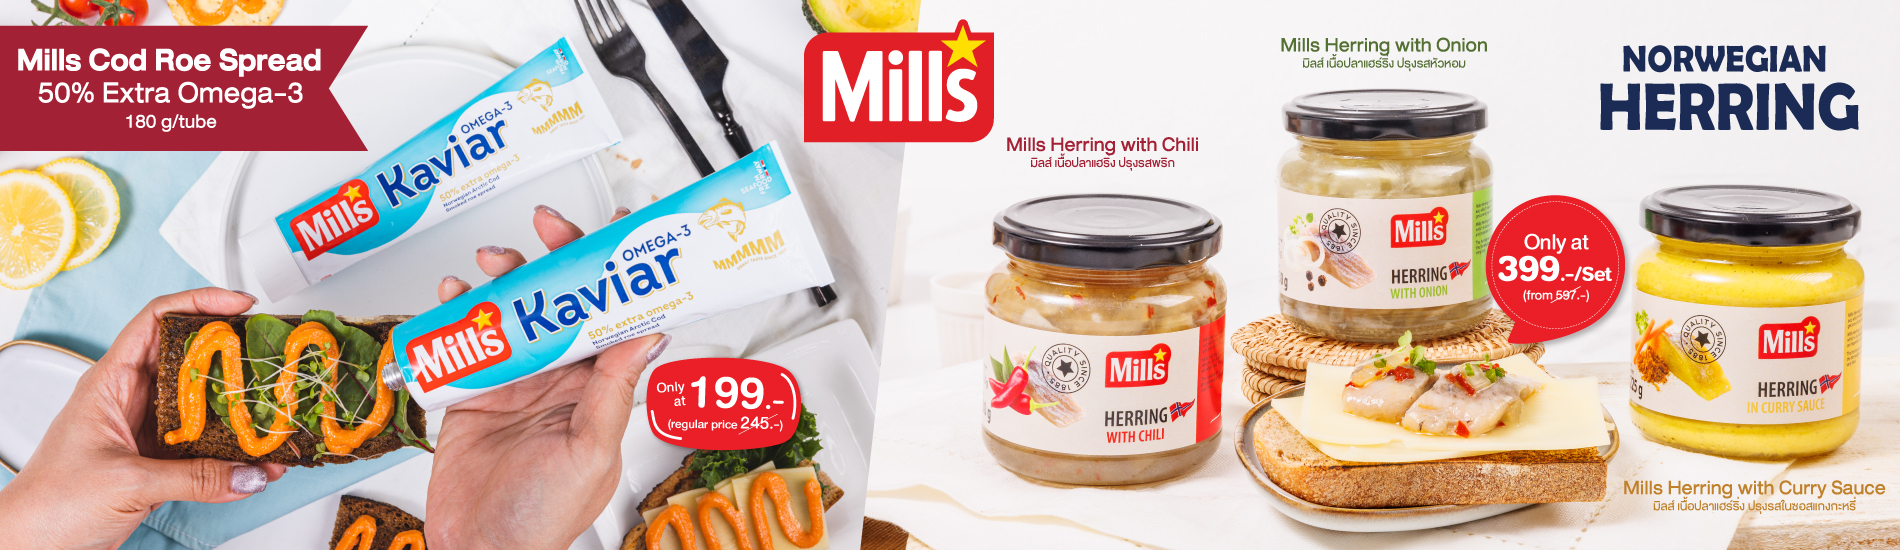 News Products Launched From Mills by Thammachart Seafood